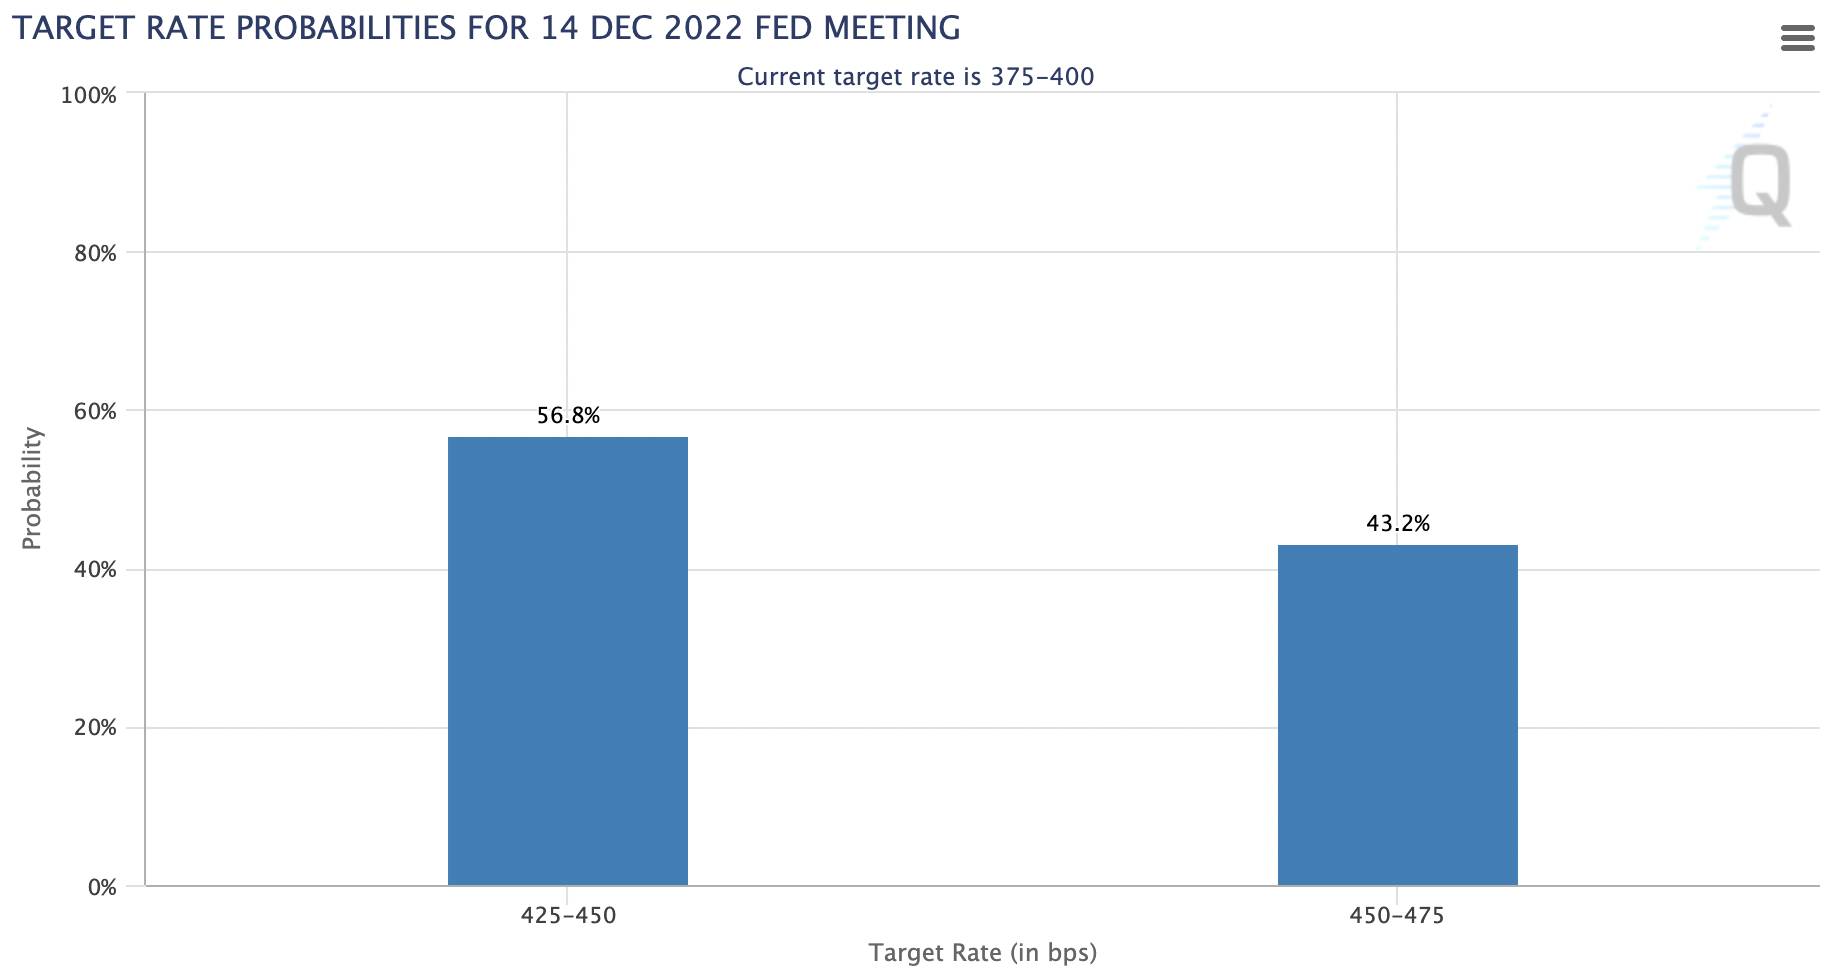 (Source: CME Group, as of Monday 7th November 2022)